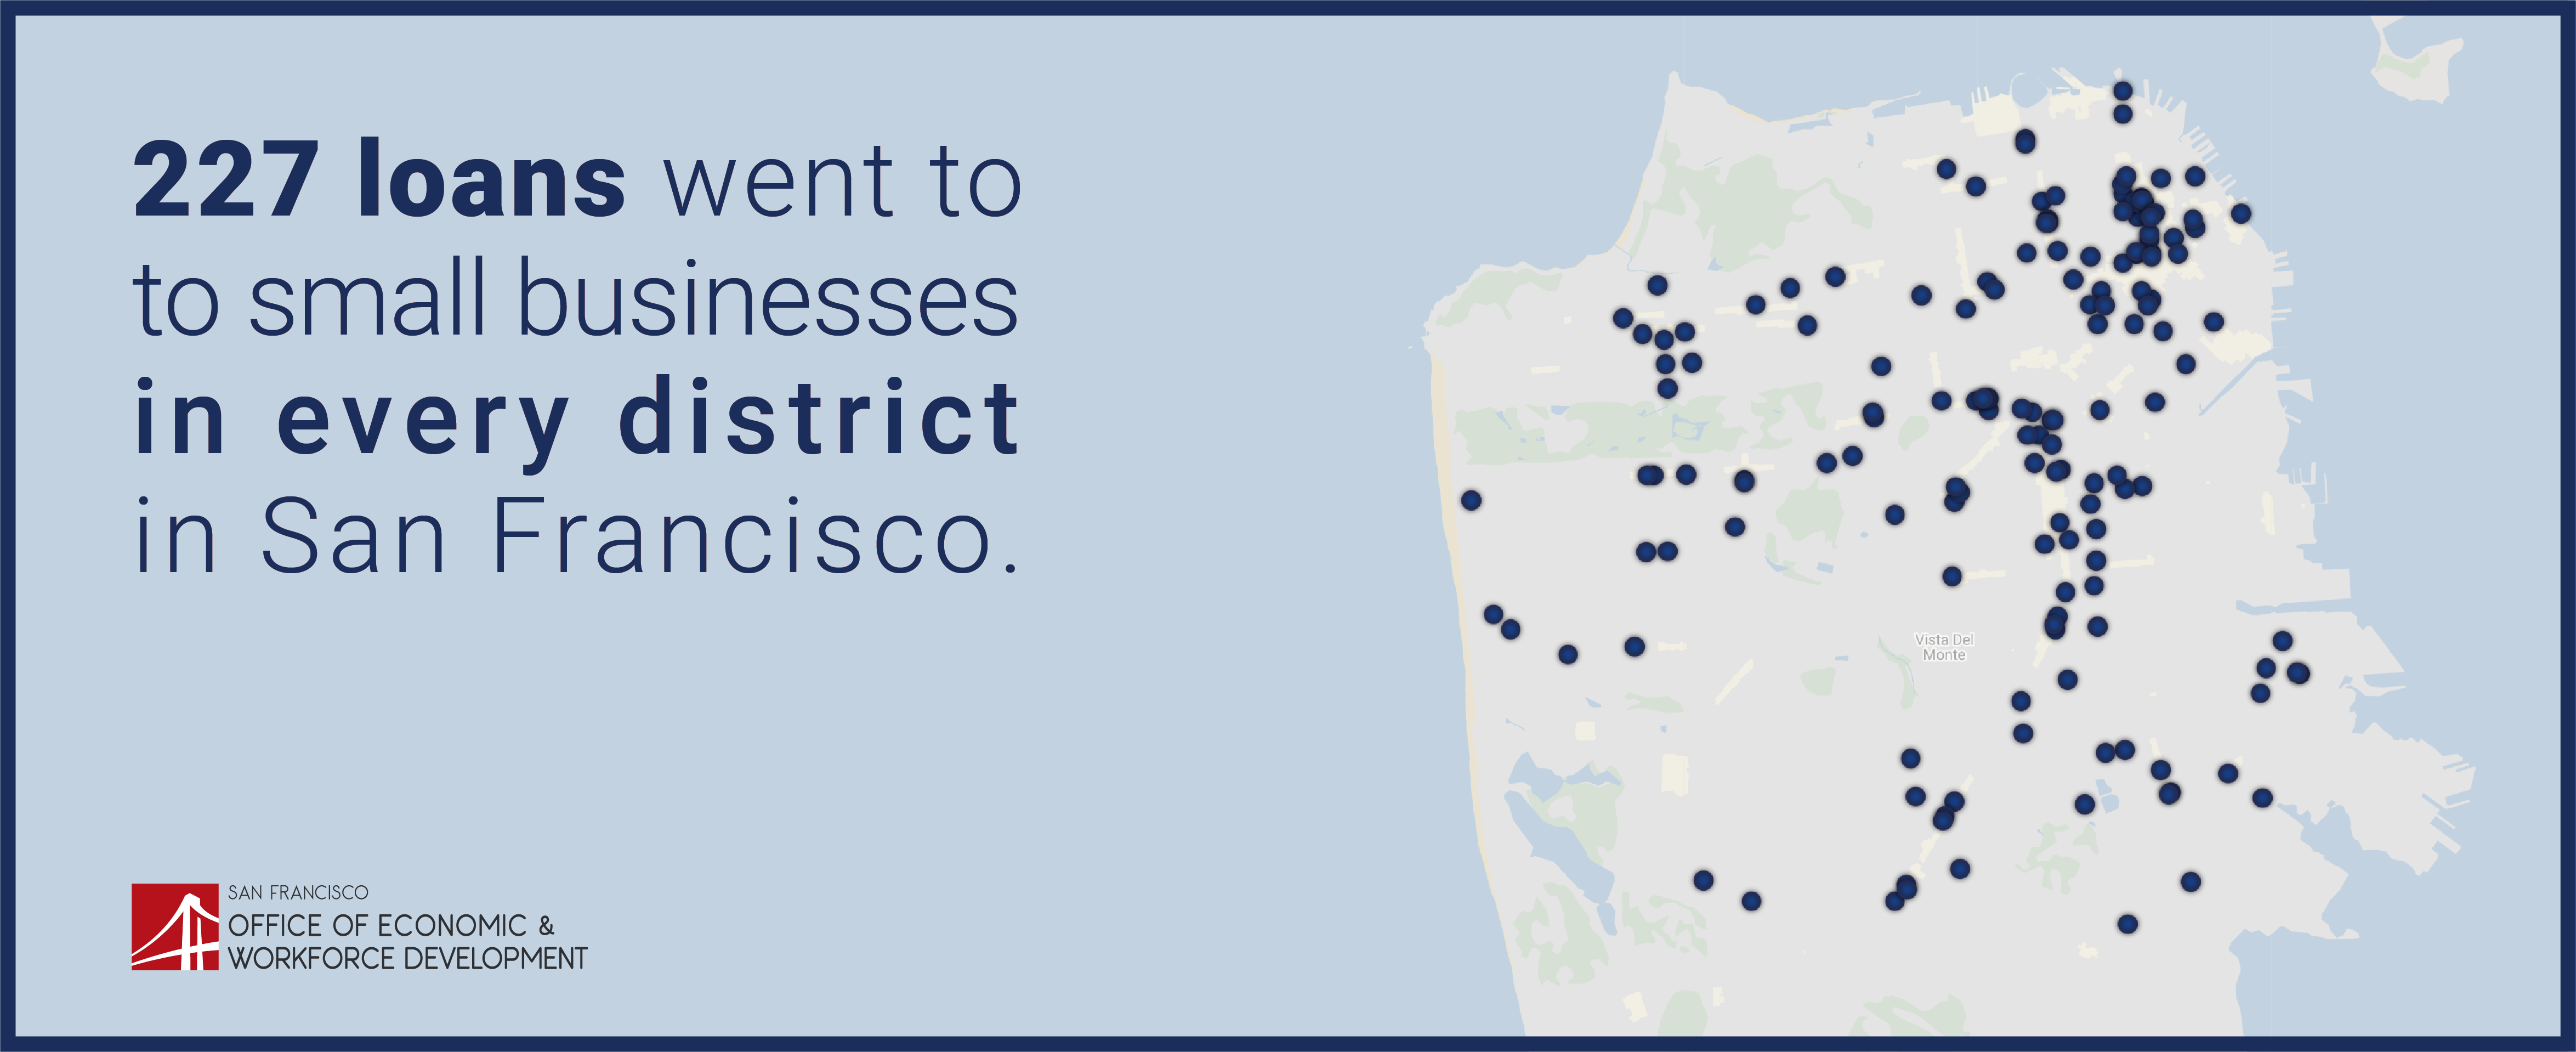 SF HELP loans have been distributed to every district in San Francisco